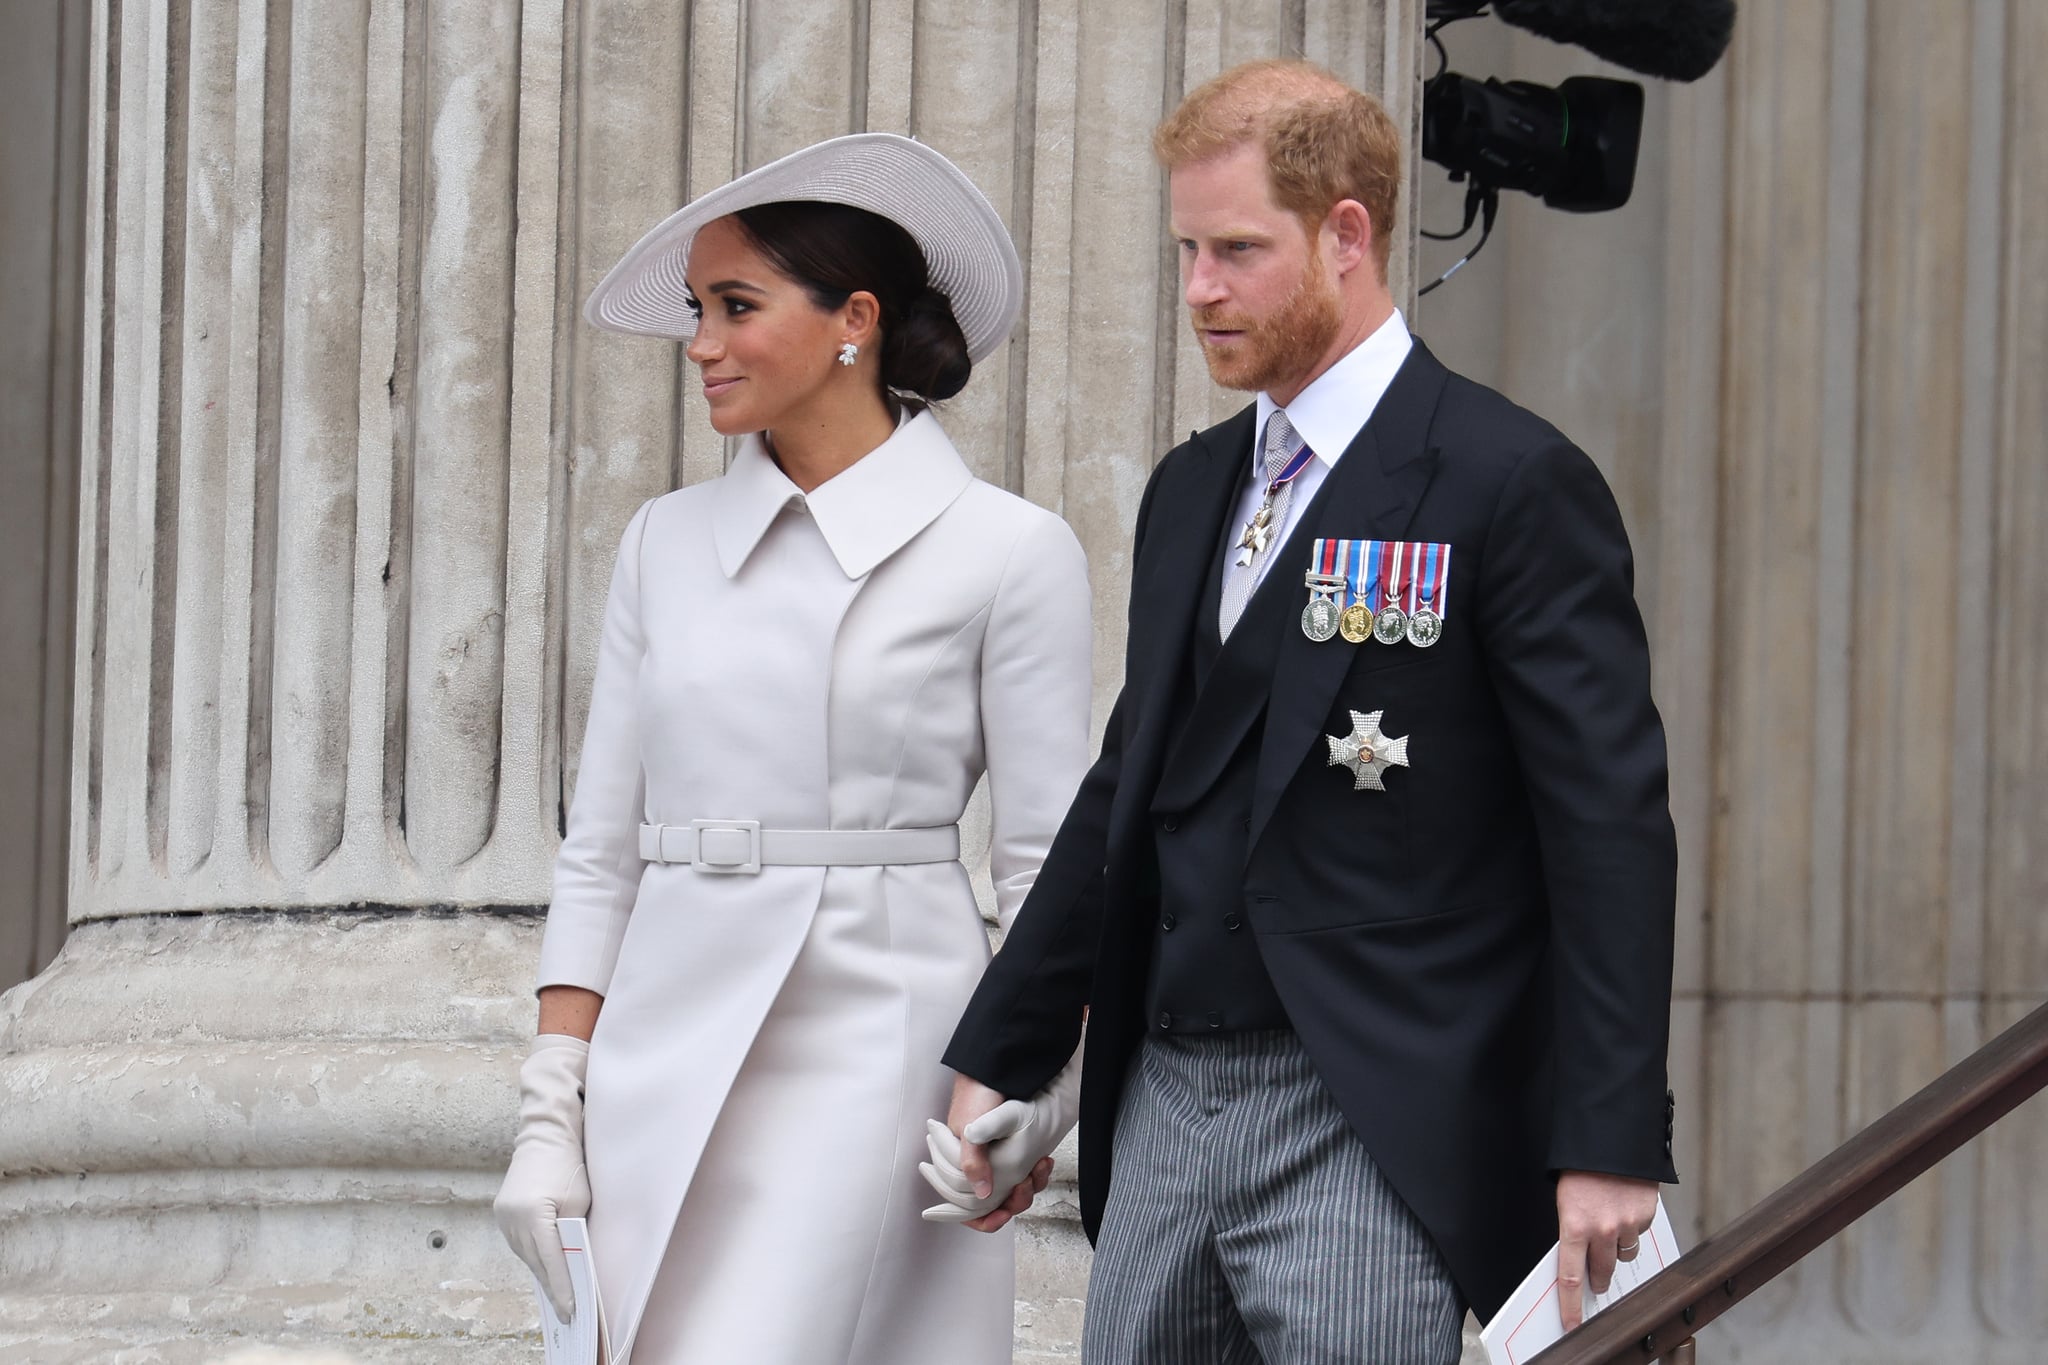 LONDON, ENGLAND - JUNE 03: Meghan, Duchess of Sussex and Prince Harry, Duke of Sussex departing St. Paul's Cathedral after the Queen Elizabeth II Platinum Jubilee 2022 - National Service of Thanksgiving on June 03, 2022 in London, England. The Platinum Jubilee of Elizabeth II is being celebrated from June 2 to June 5, 2022, in the UK and Commonwealth to mark the 70th anniversary of the accession of Queen Elizabeth II on 6 February 1952. (Photo by Neil Mockford/GC Images)